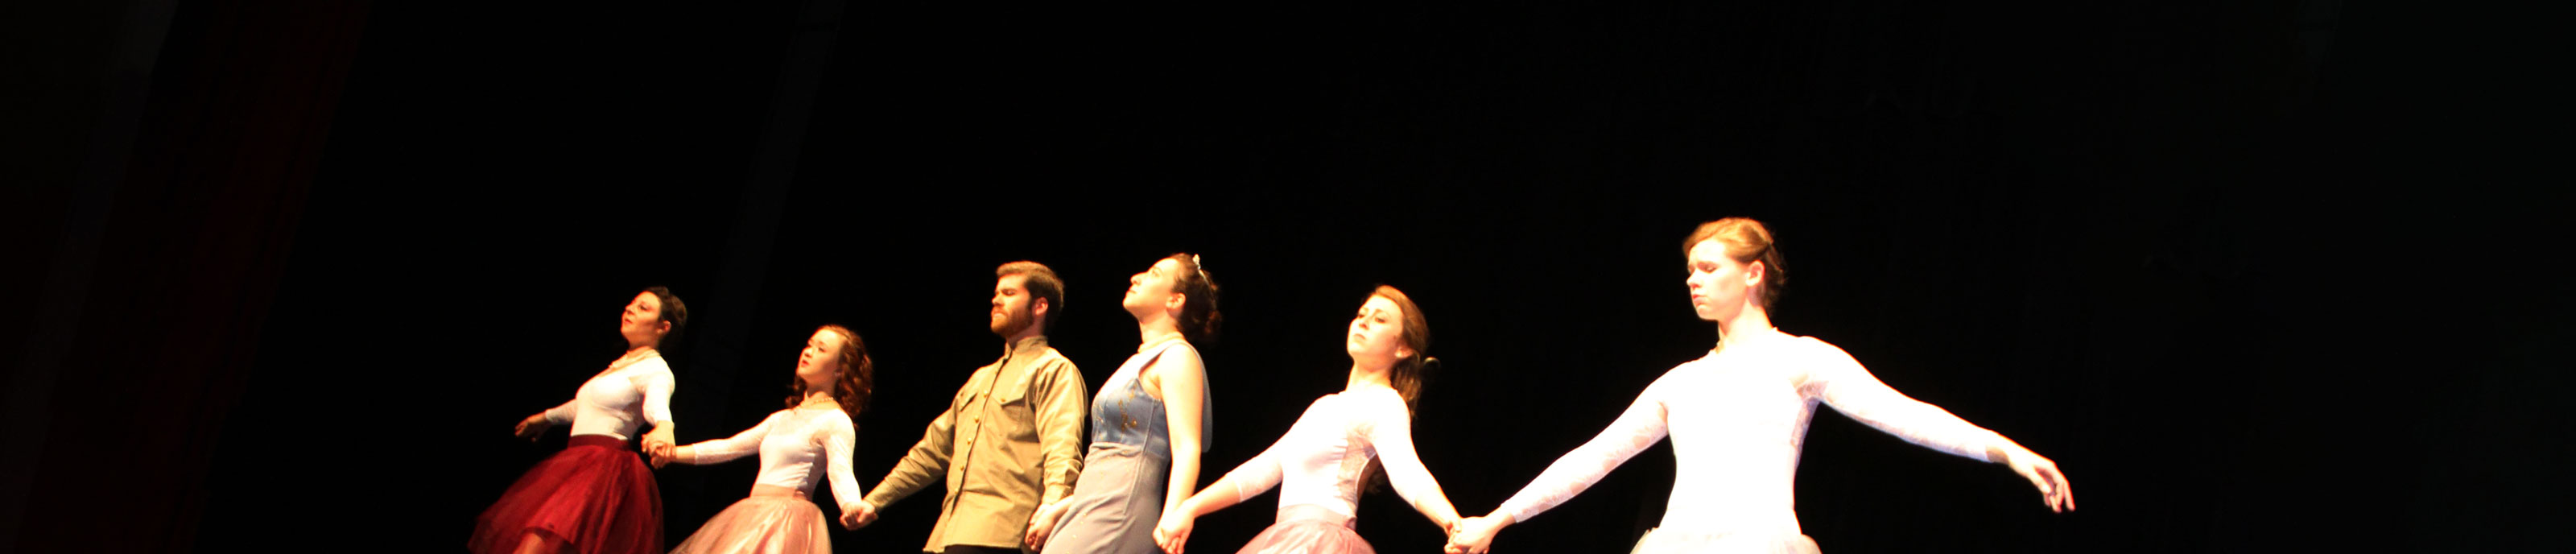 Students performing a ballet